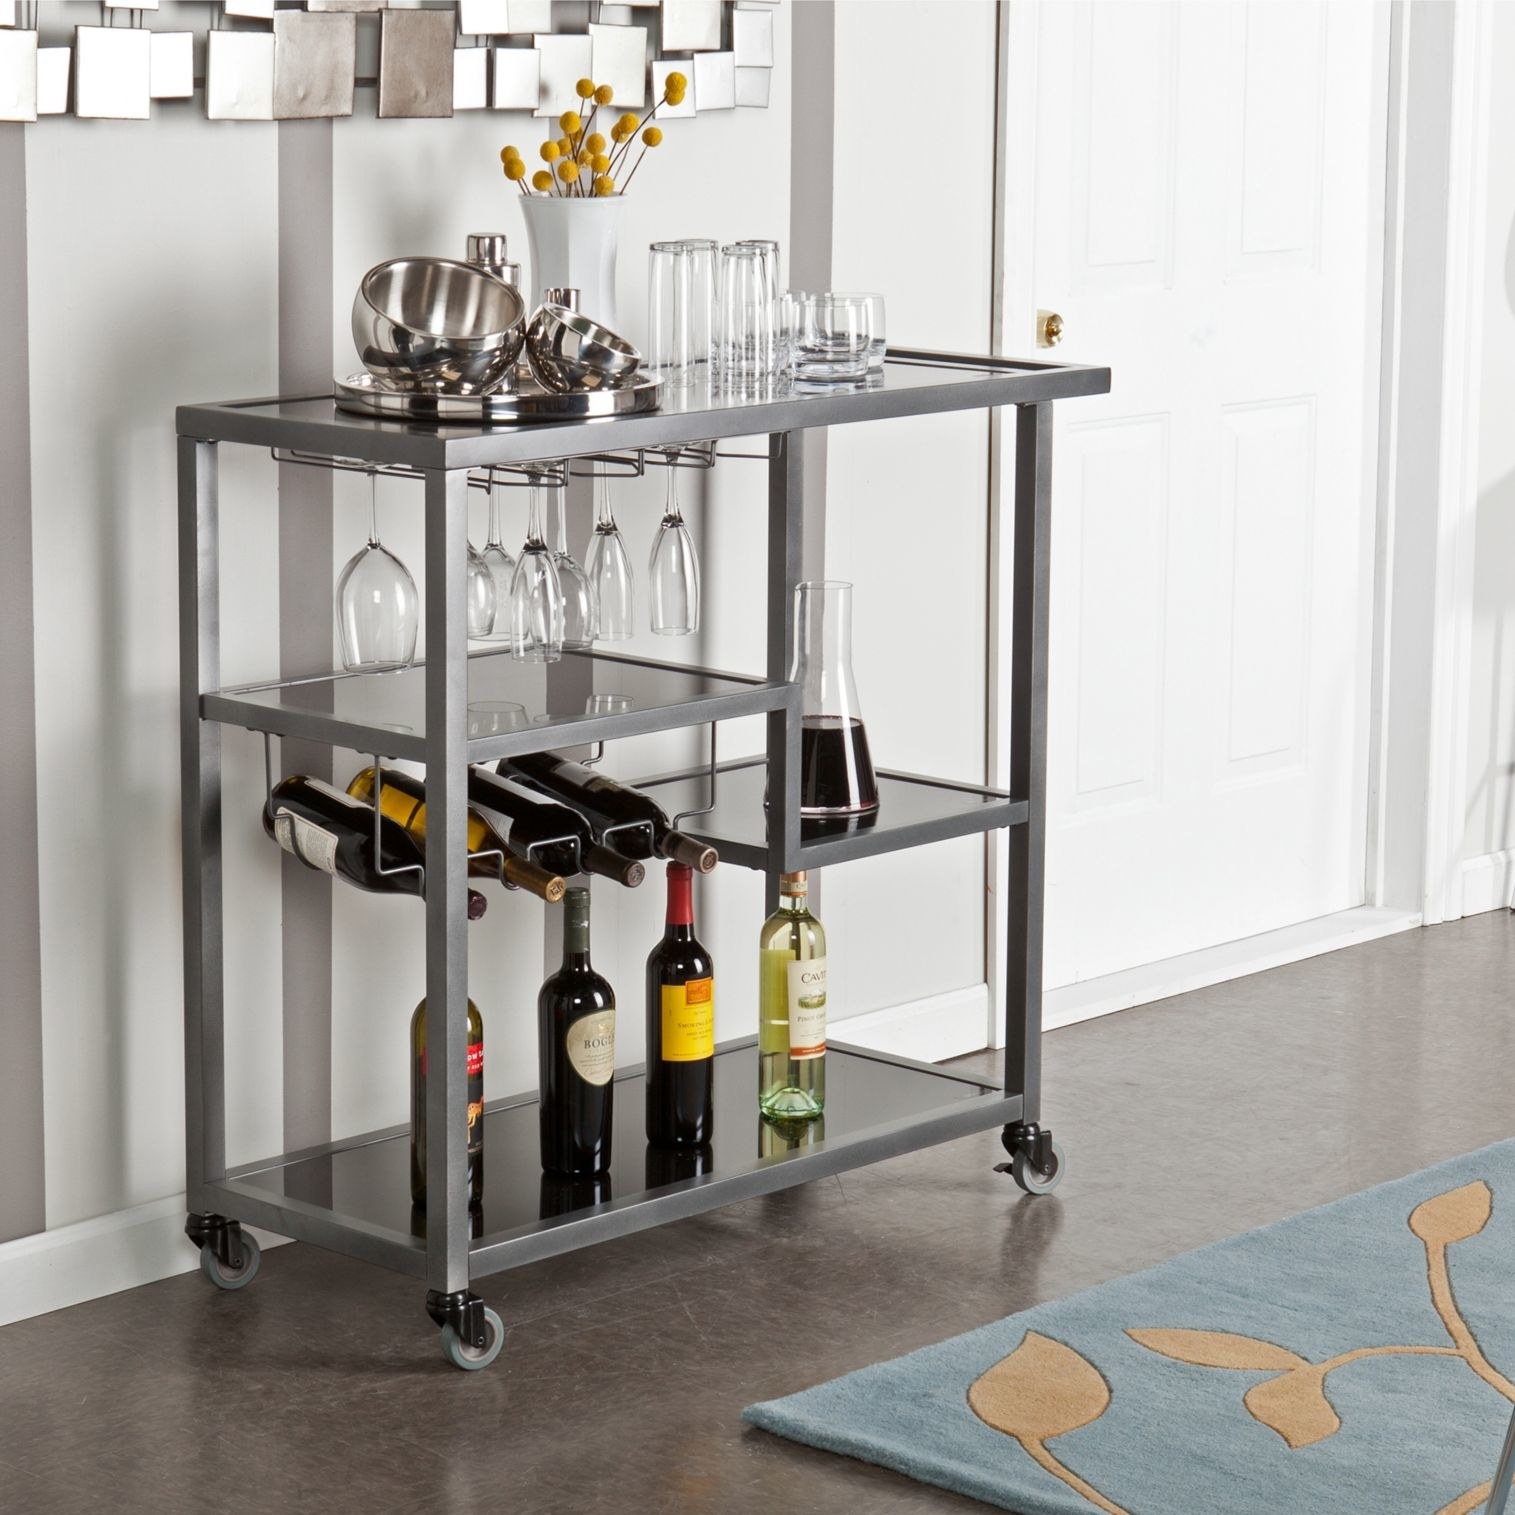 A charcoal metal bar cart with four shelves, 4 wine bottle rack, and 8 wine glasses rack on wheels